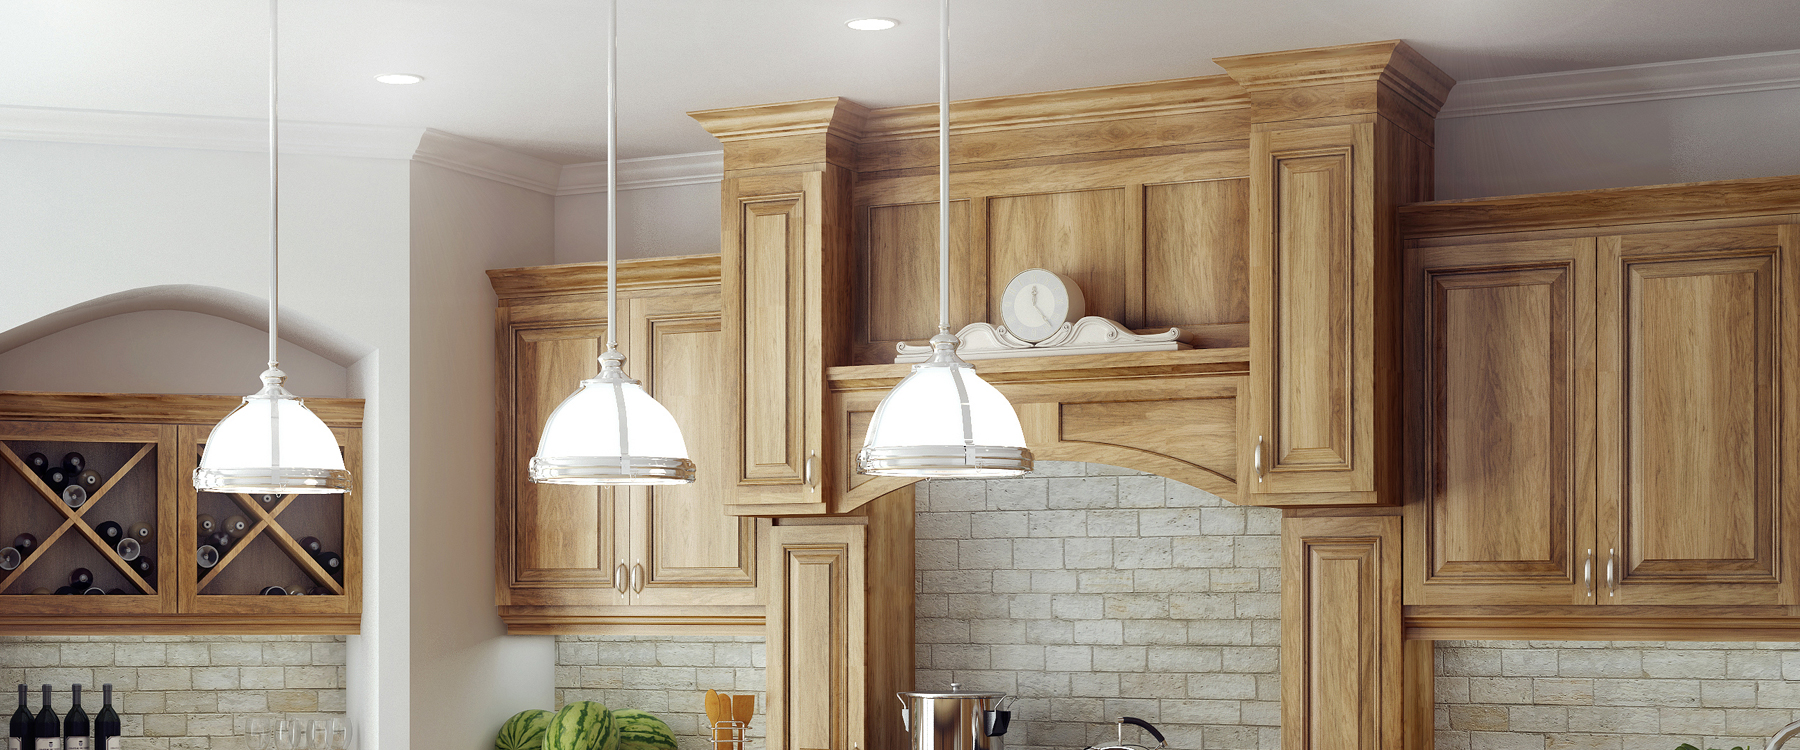 Three Hanging Lights in a Kitchen with Wooden Cabinets | Canyon Creek Cabinet Company